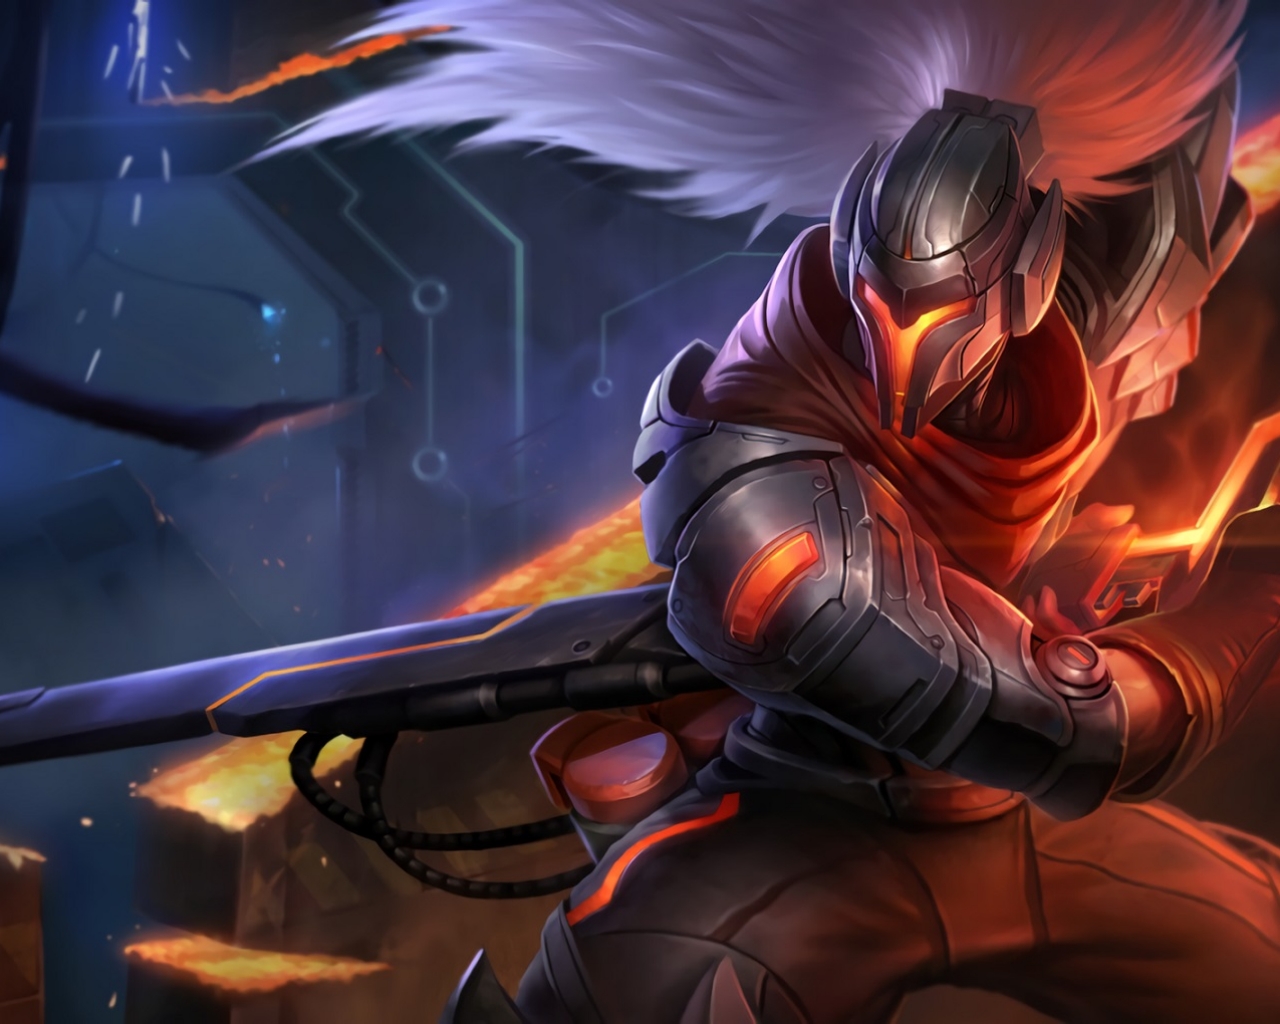 league of legends wallpaper 1280x1024,action adventure game,cg artwork,pc game,games,adventure game